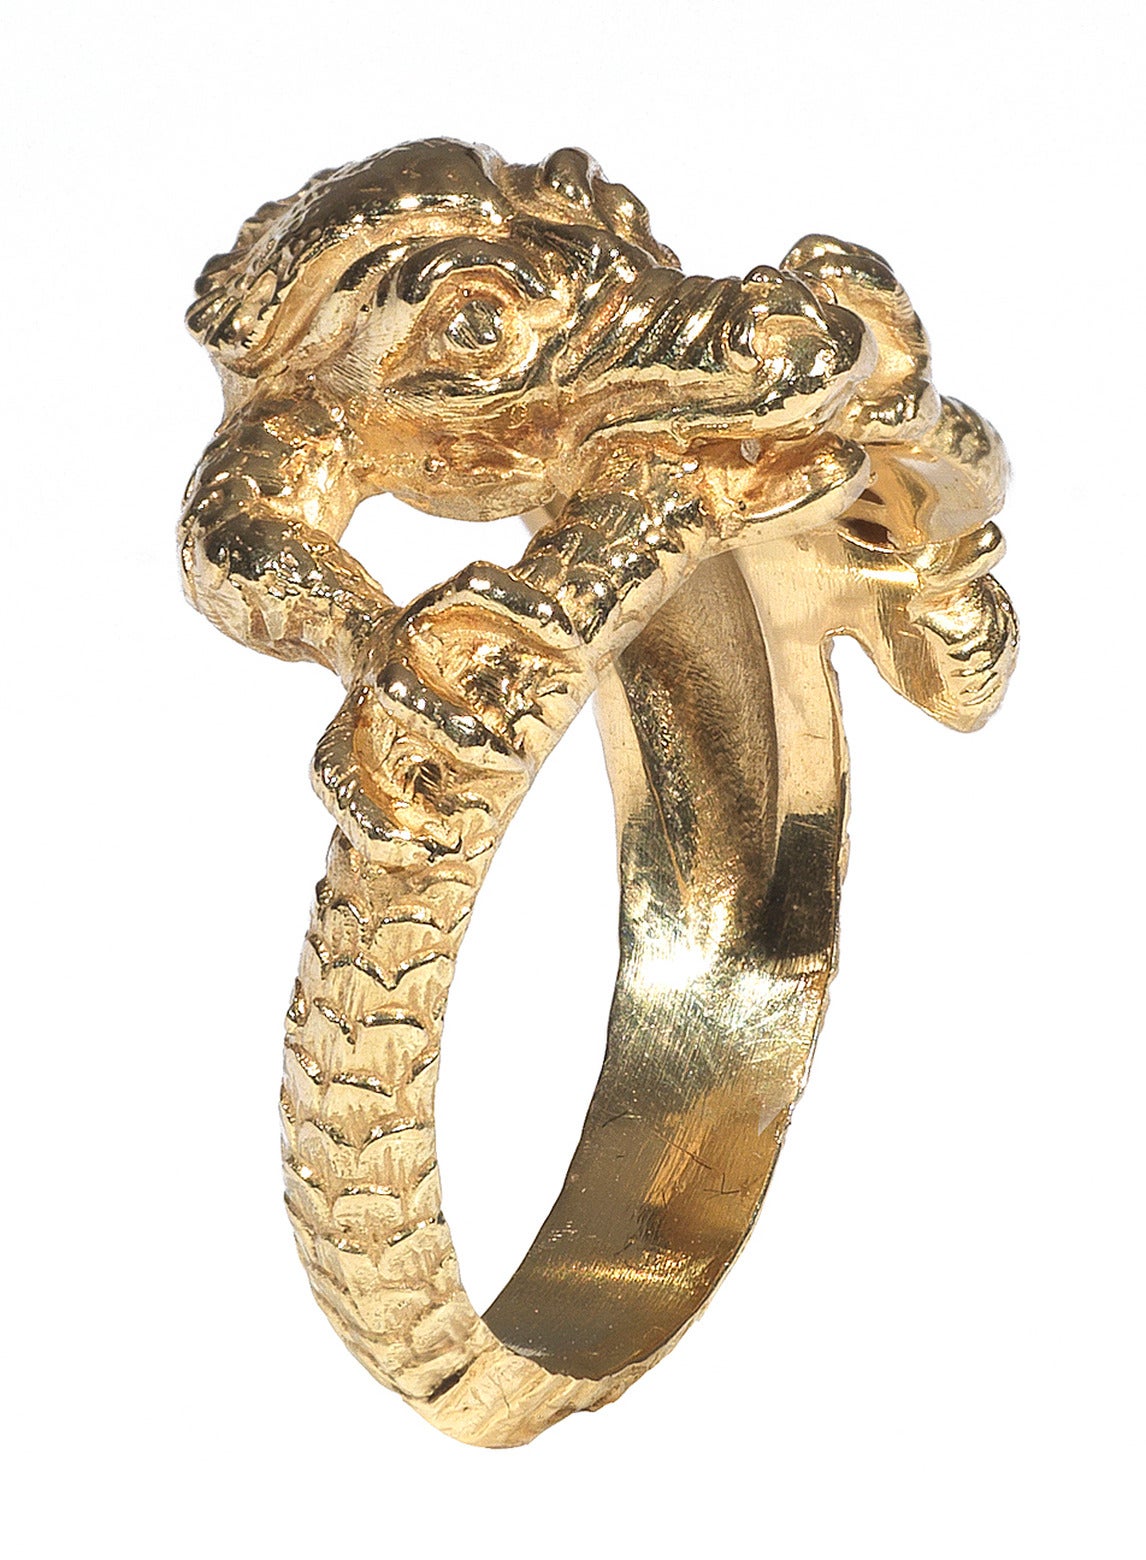 Bernardo Antichità Ponte Vecchio Florence

Modeled as a Chinese dragon biting its tail.

Mounted in 18Kt gold

Finger size: 9

Weight: 12.9 gr